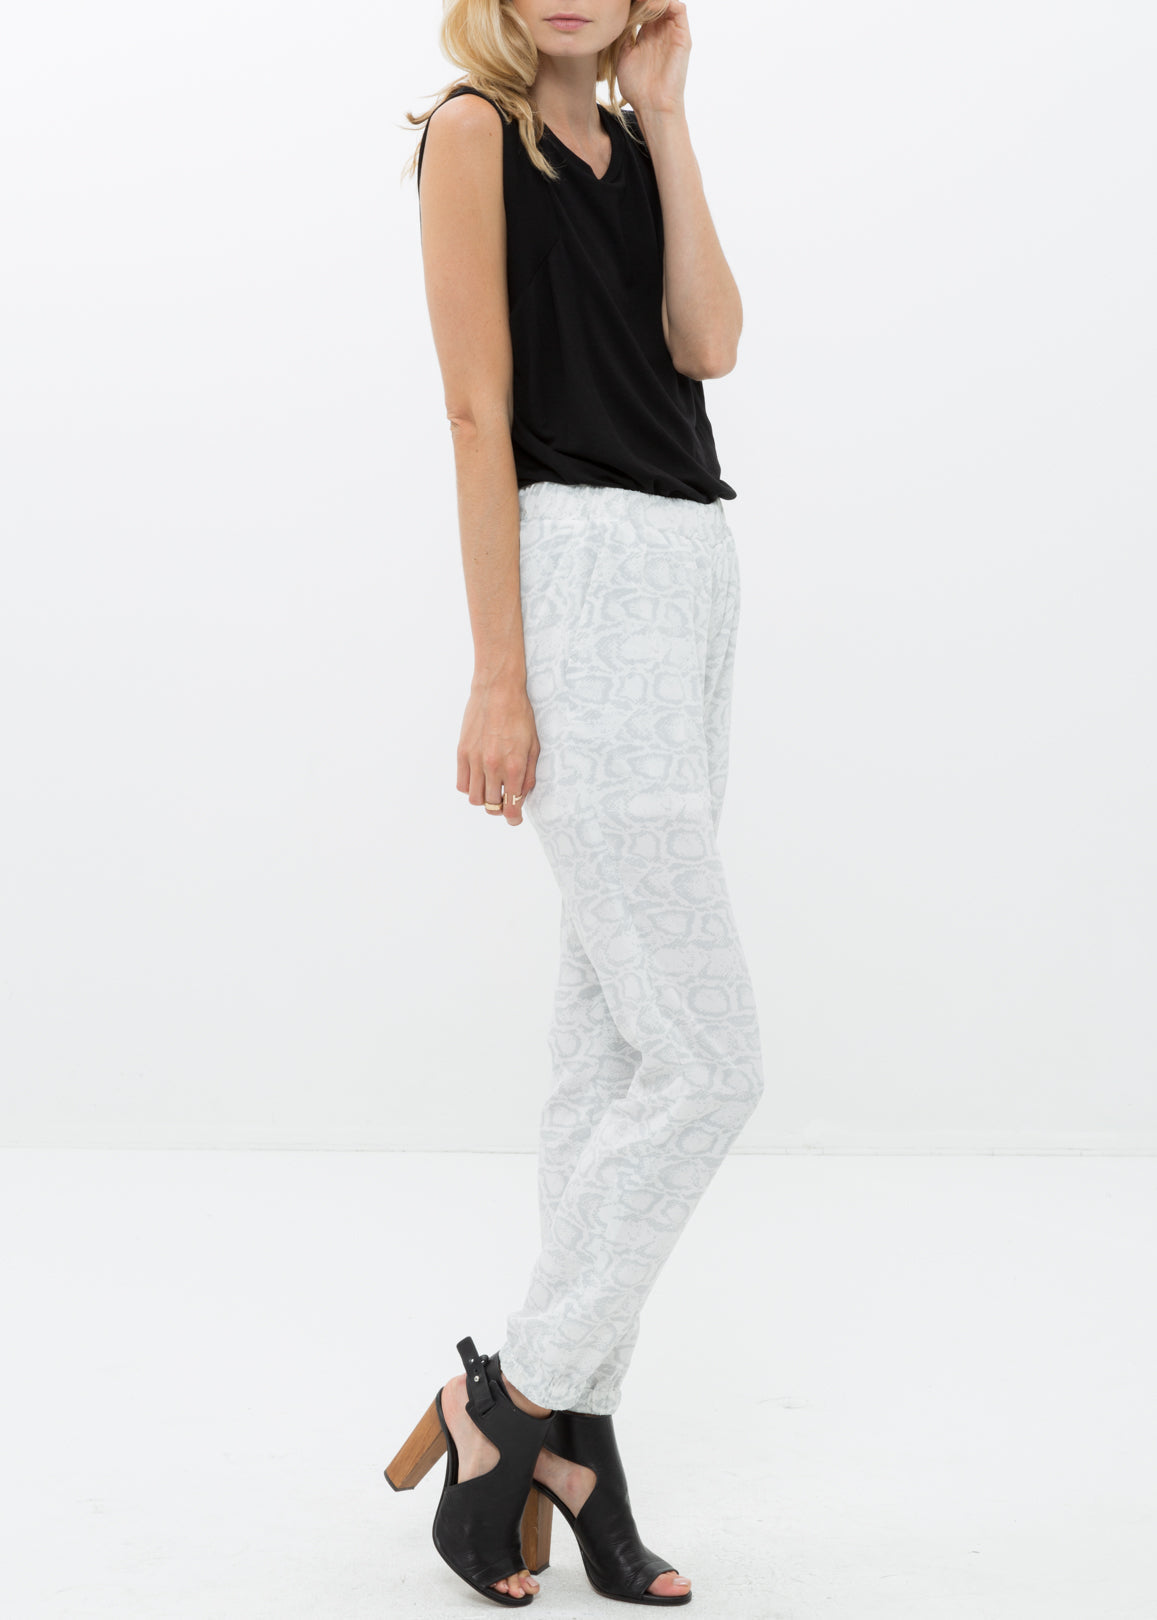 Women's High Waist Printed Pants In Ivory Silver